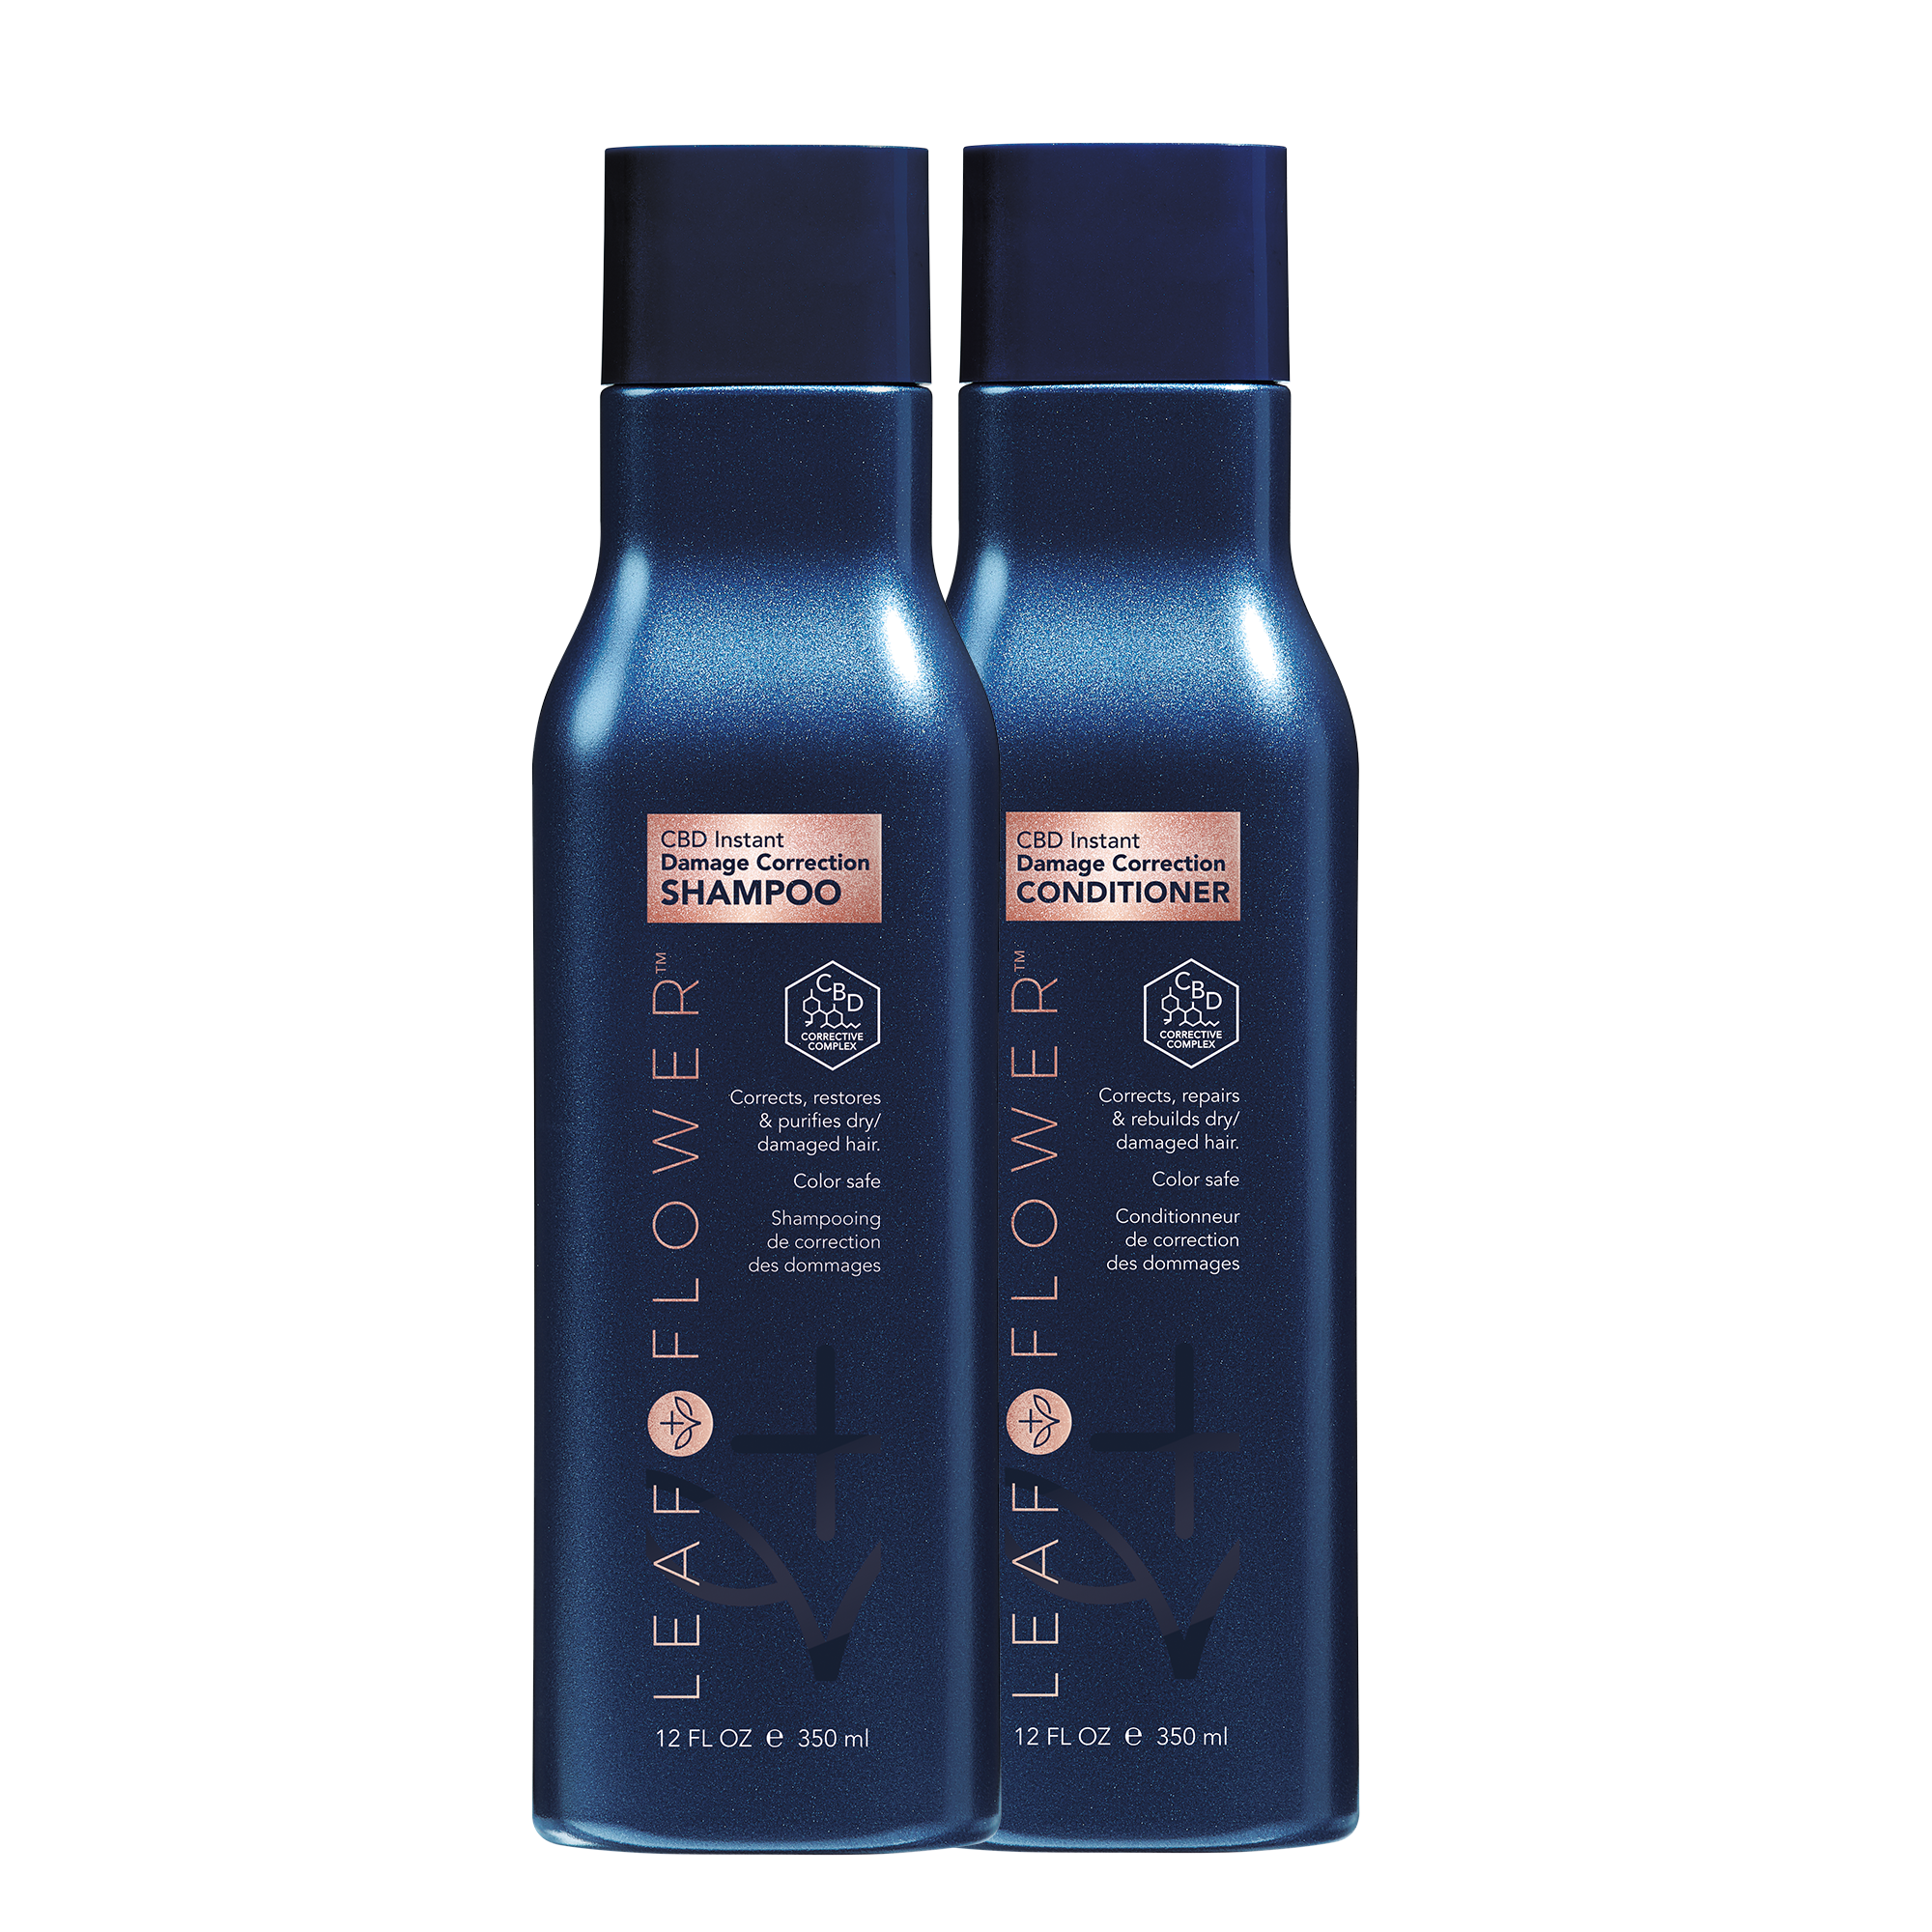 L&F CBD INSTANT DAMAGE CORRECTION SHAMPOO/CONDITIONER DUO PACK - 2x 12 OZ(Buy 3 Get 1 Free Mix & Match)